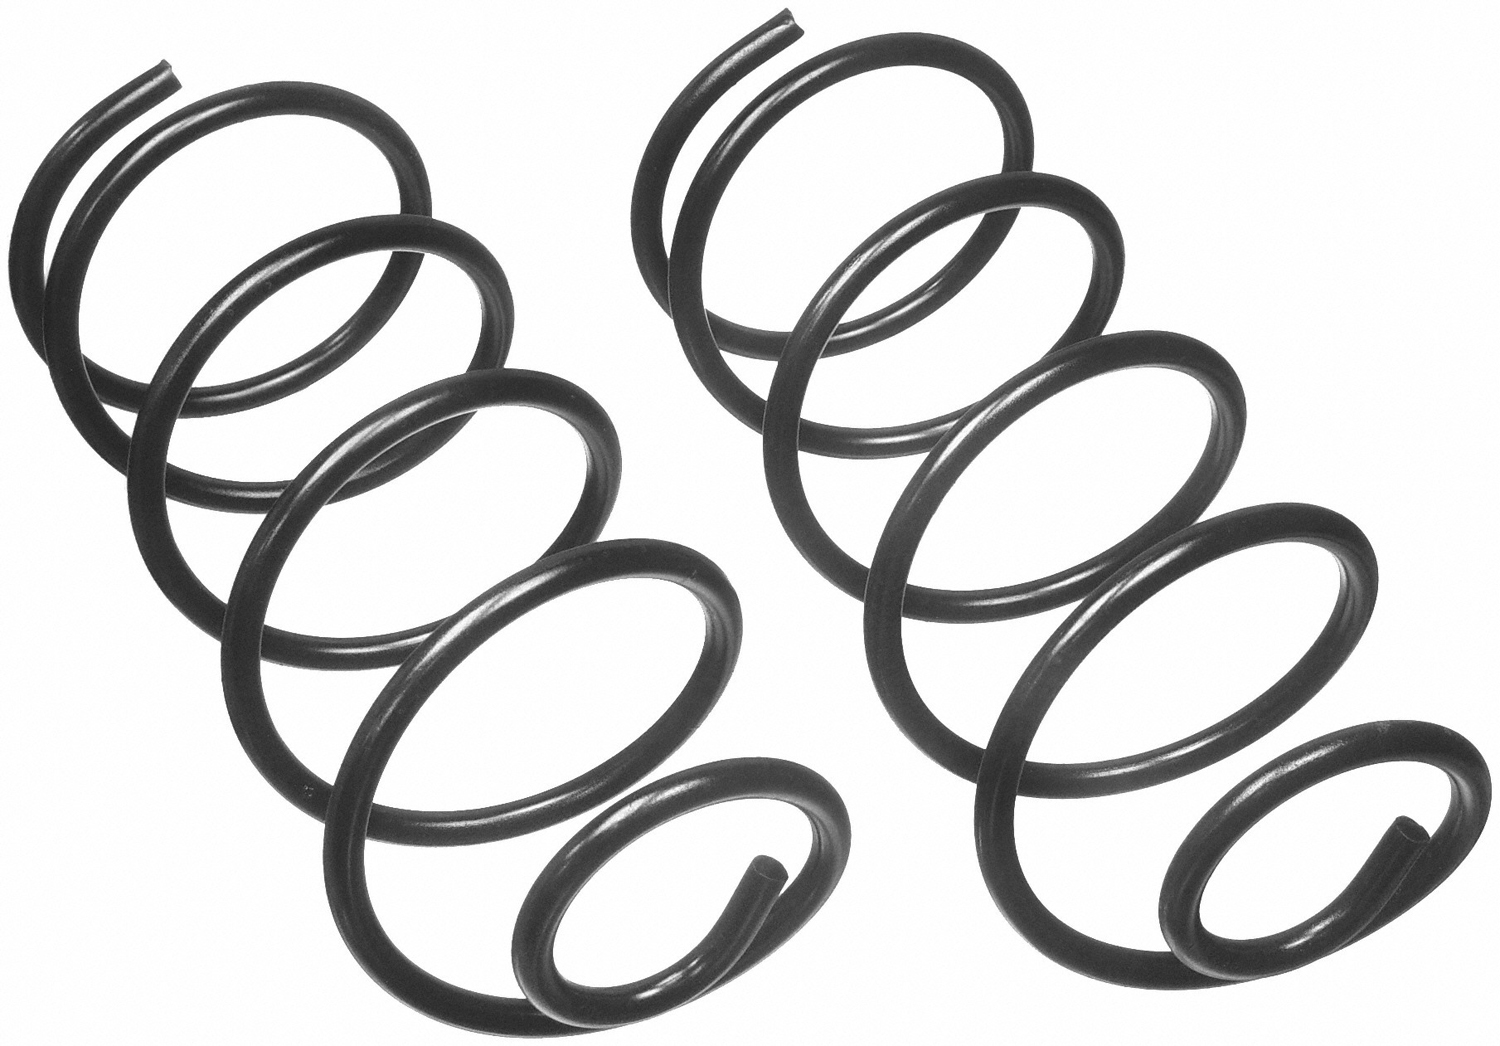 Image of ID 6452 Moog 6452 Coil Spring Set Fits 1984-1986 Chevrolet C10